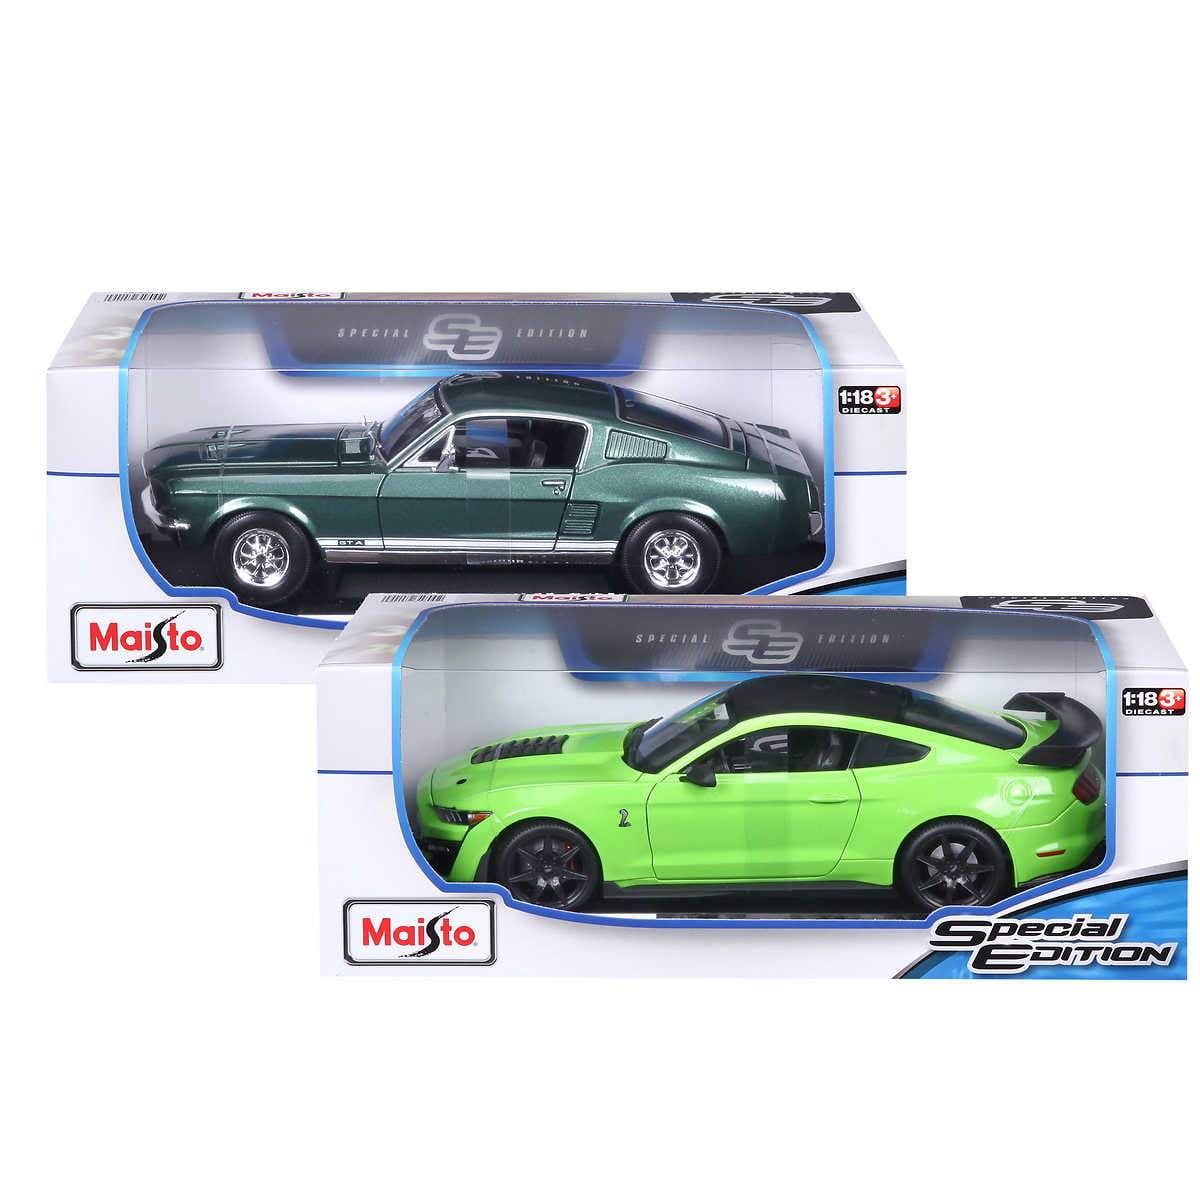 Maisto 1:18 Die Cast Vehicle 2-Pack 1967 Mustang GTA Fastback and 2020 Shelby G 